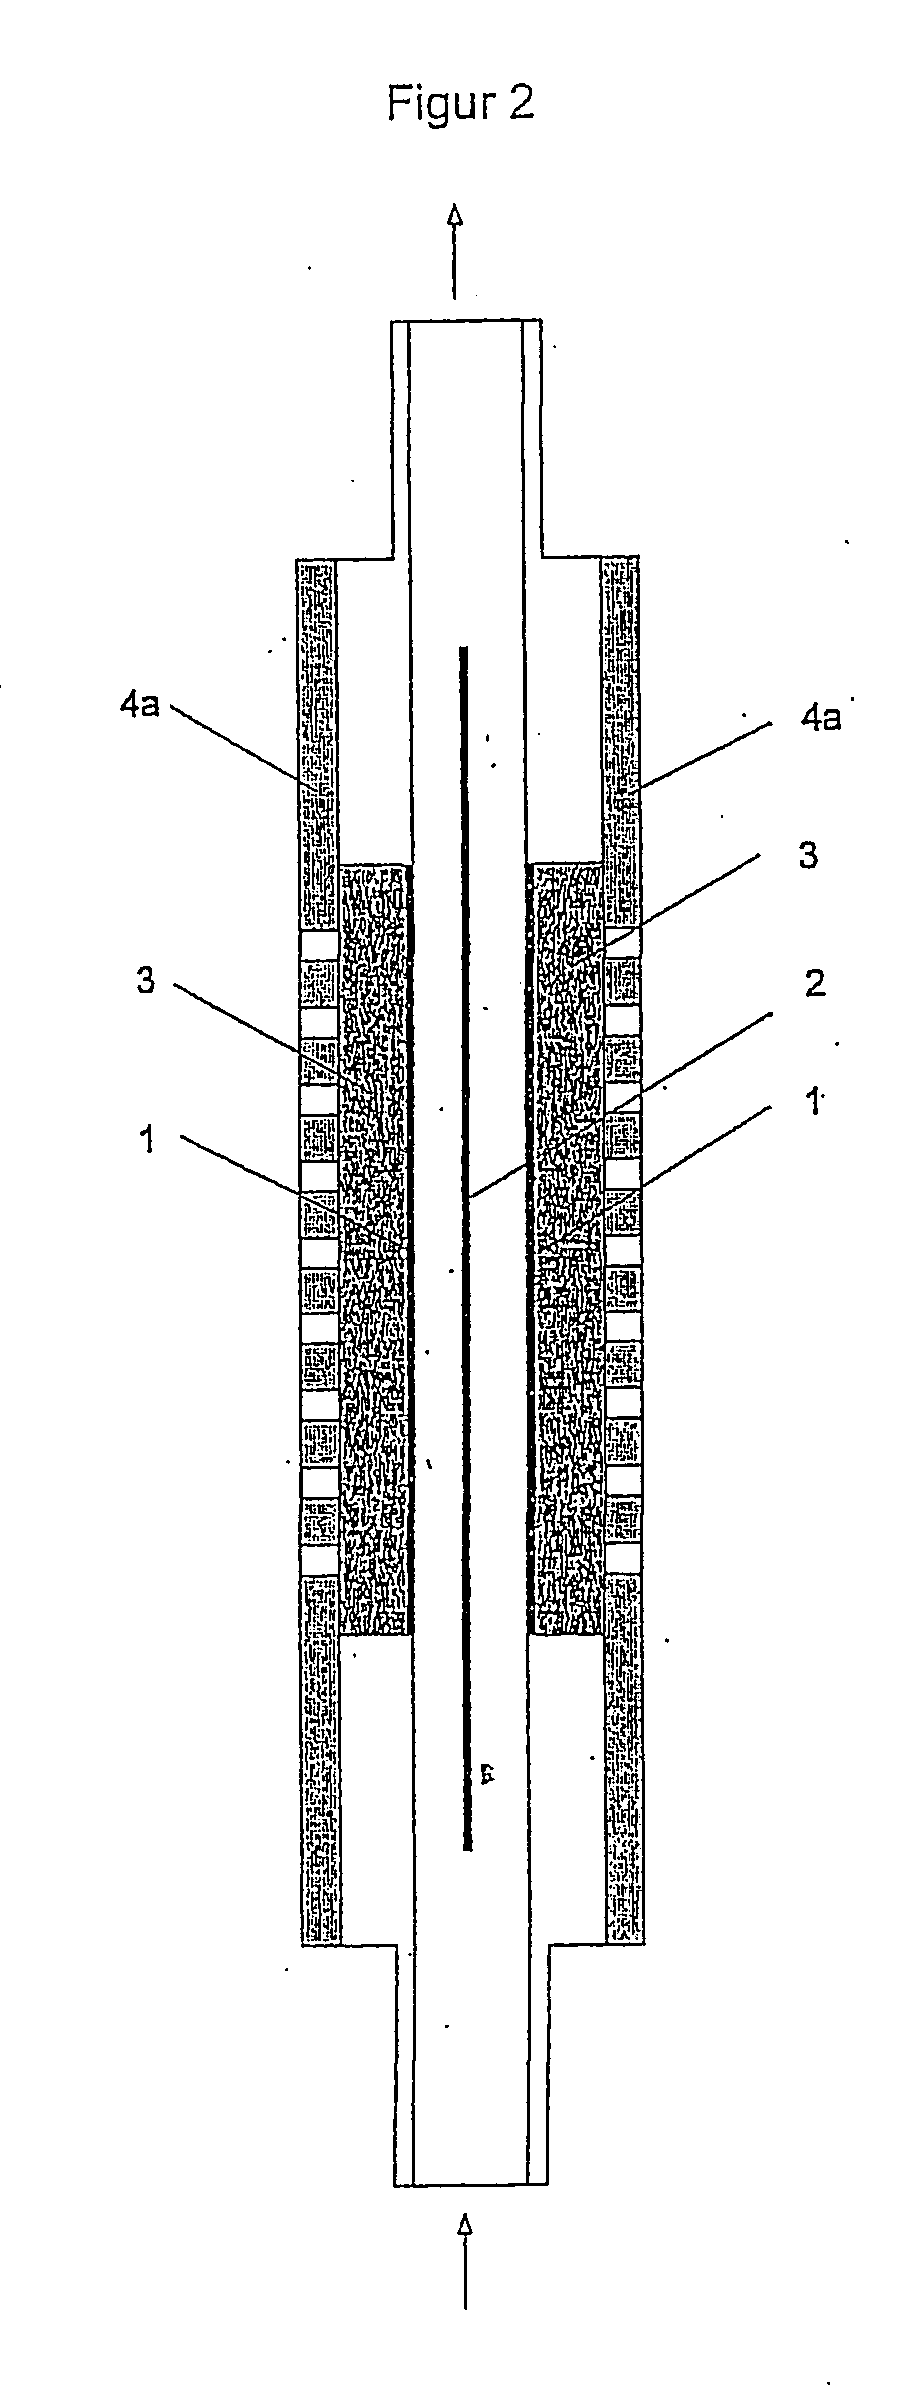 Method for electrolytic water disinfection without cathodic hydrogen evolution